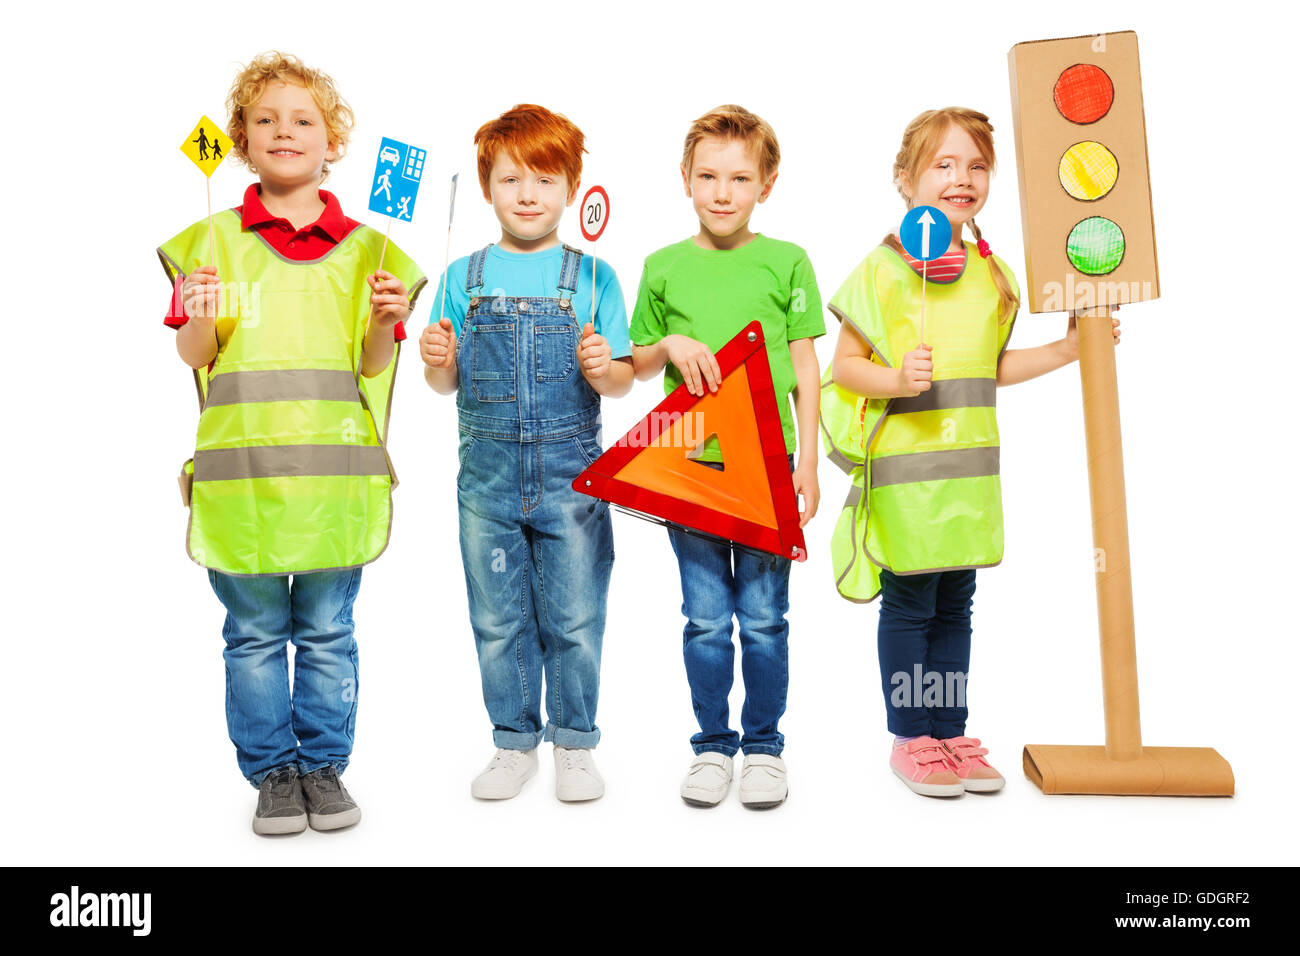 Group of four kids studying road safety rules Stock Photo